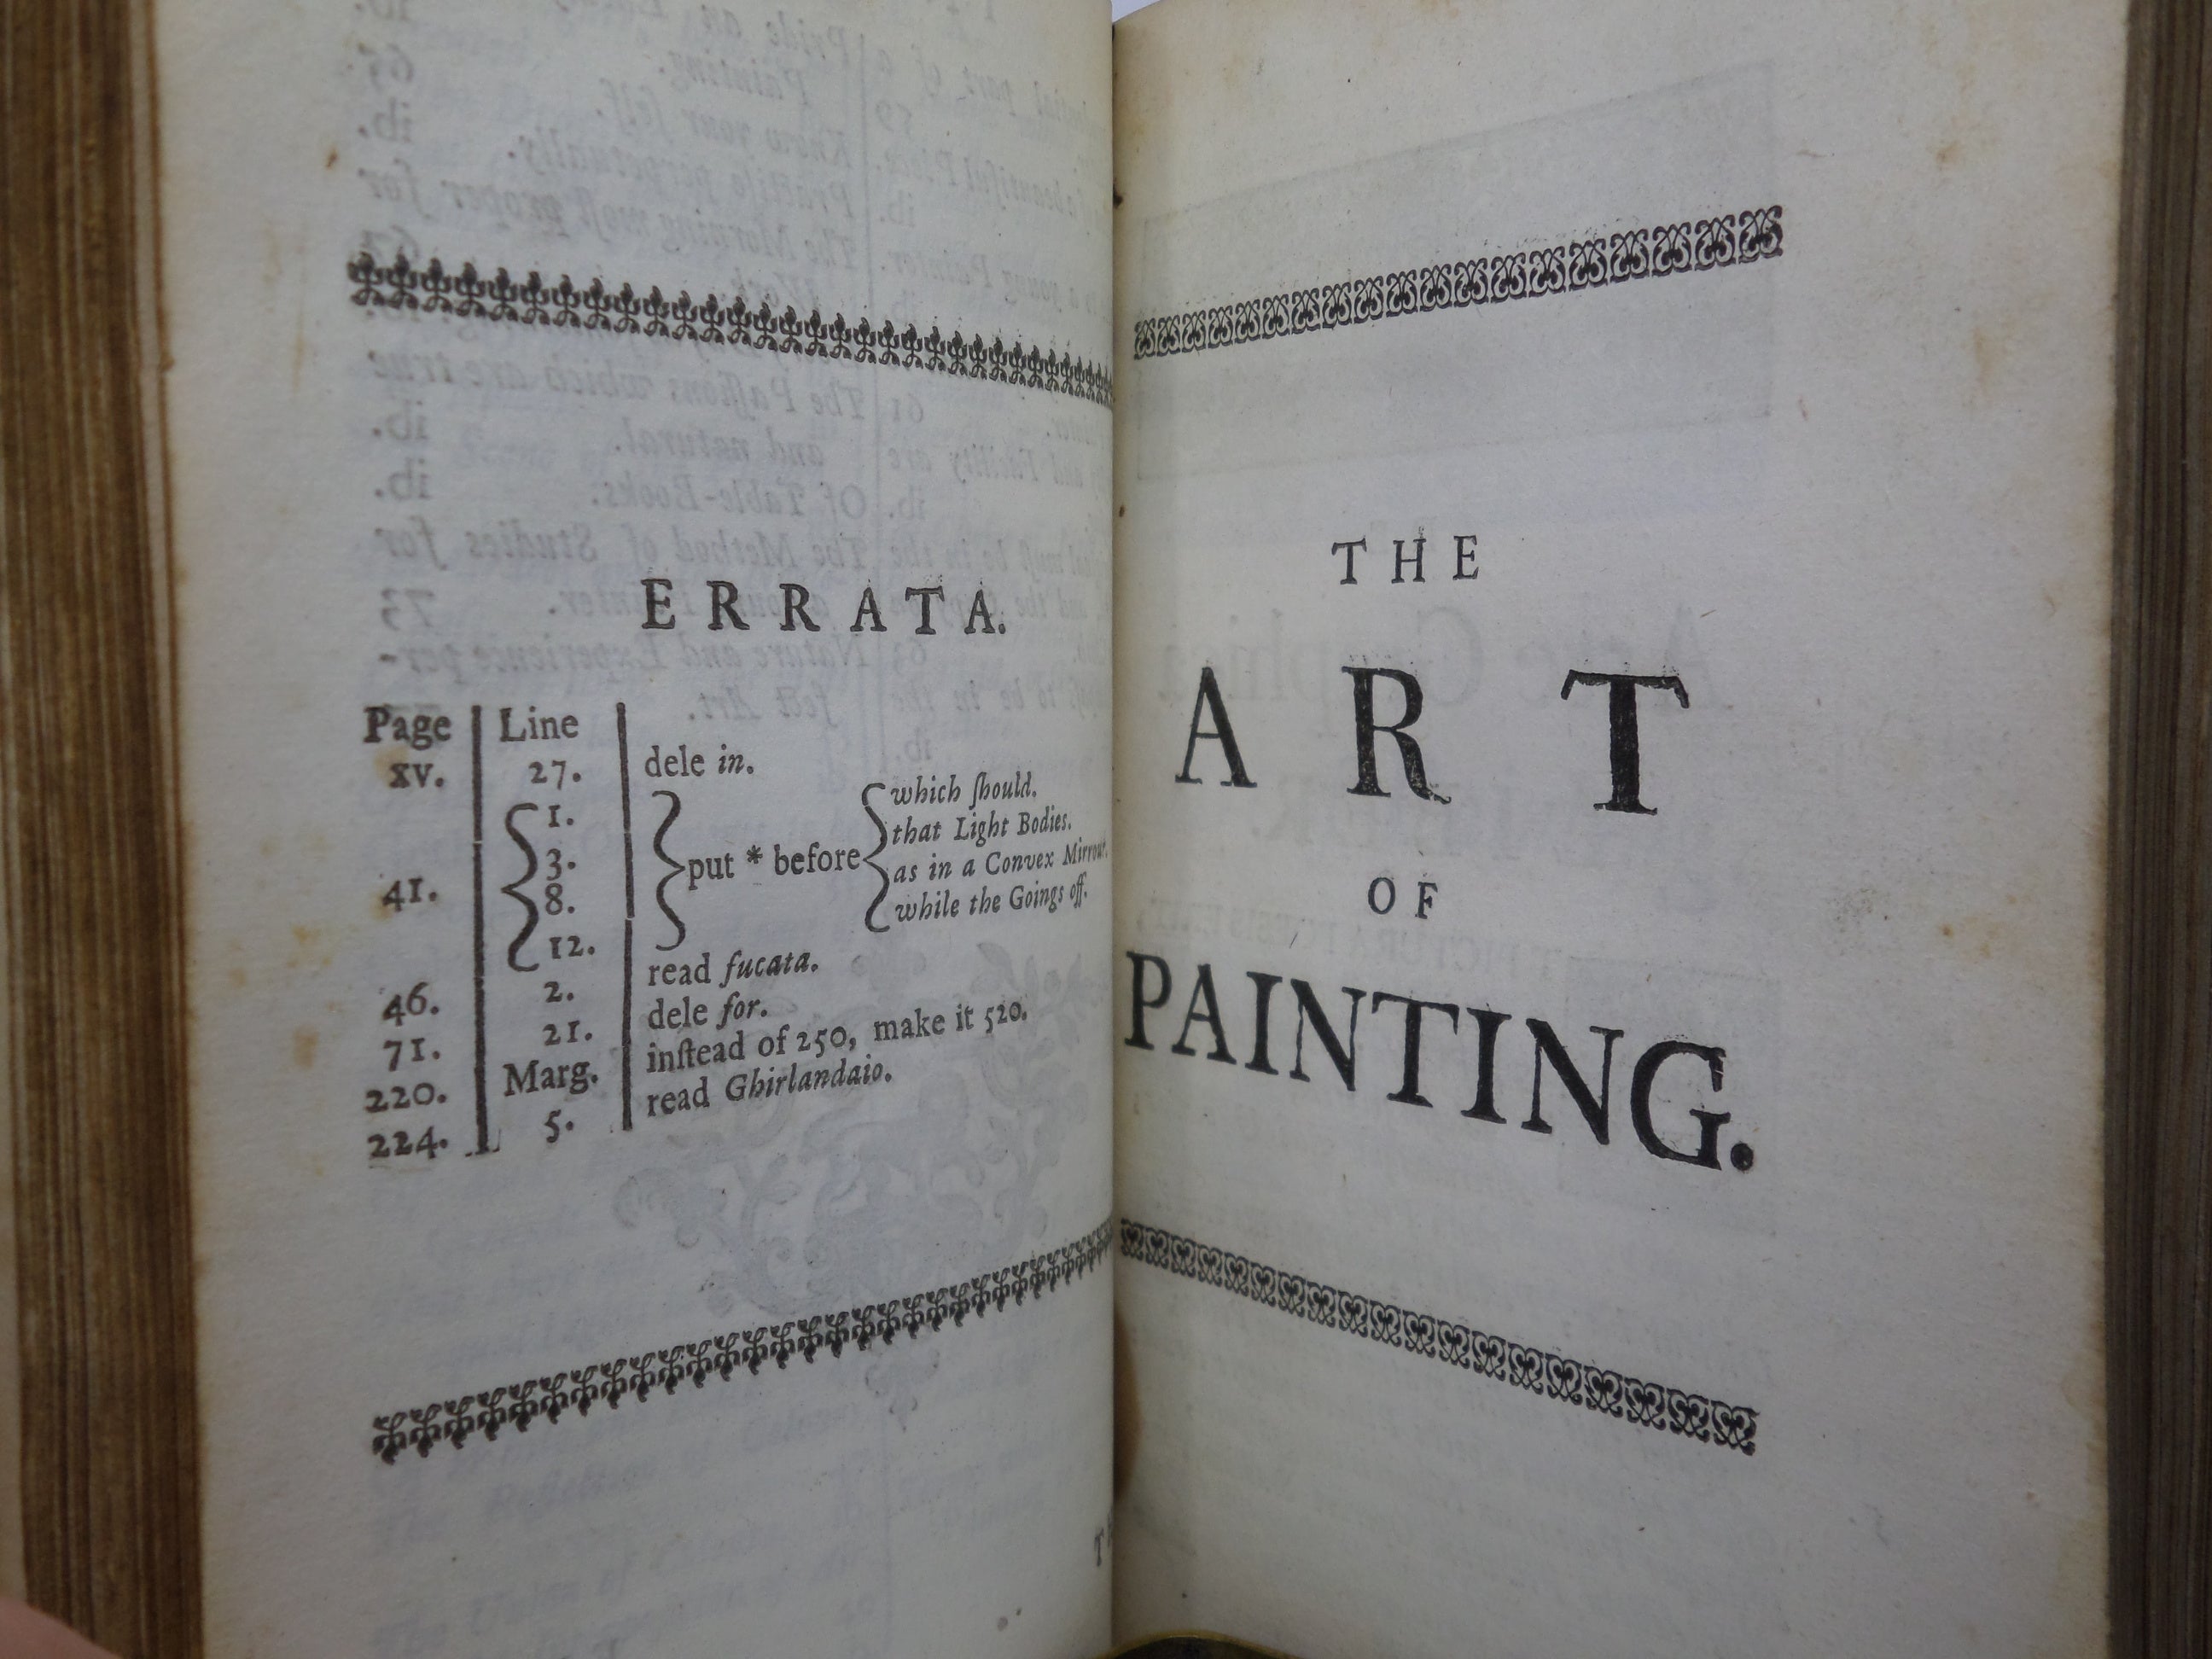 THE ART OF PAINTING BY C.A. DU FRESNOT TRANS BY DRYDEN 1716 FINE LEATHER BINDING